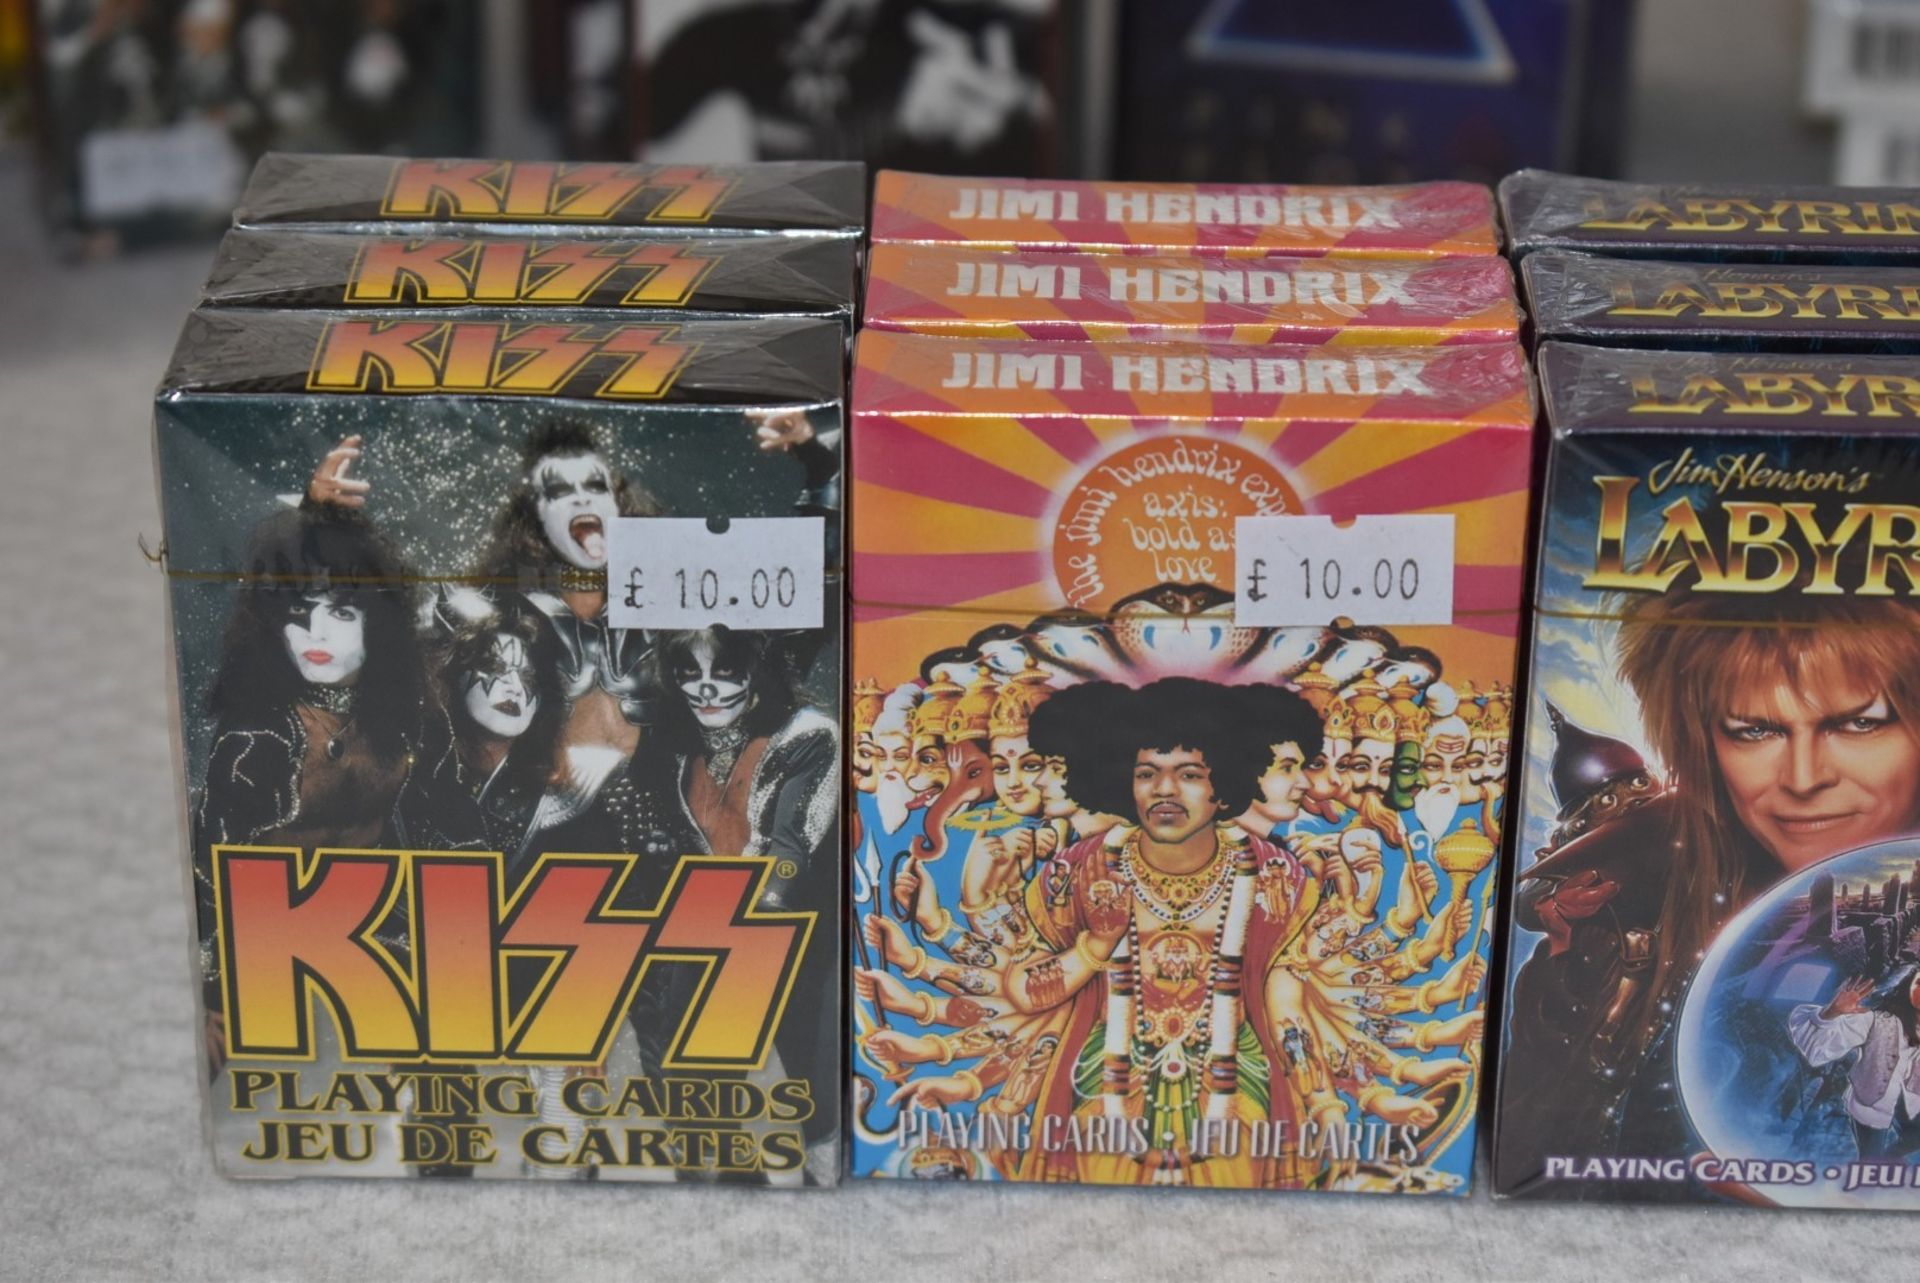 12 x Packs of Themed Playing Cards Featuring Jimi Hendrix, Fender, Labyrinth & Kiss - RRP £120 - Image 2 of 7